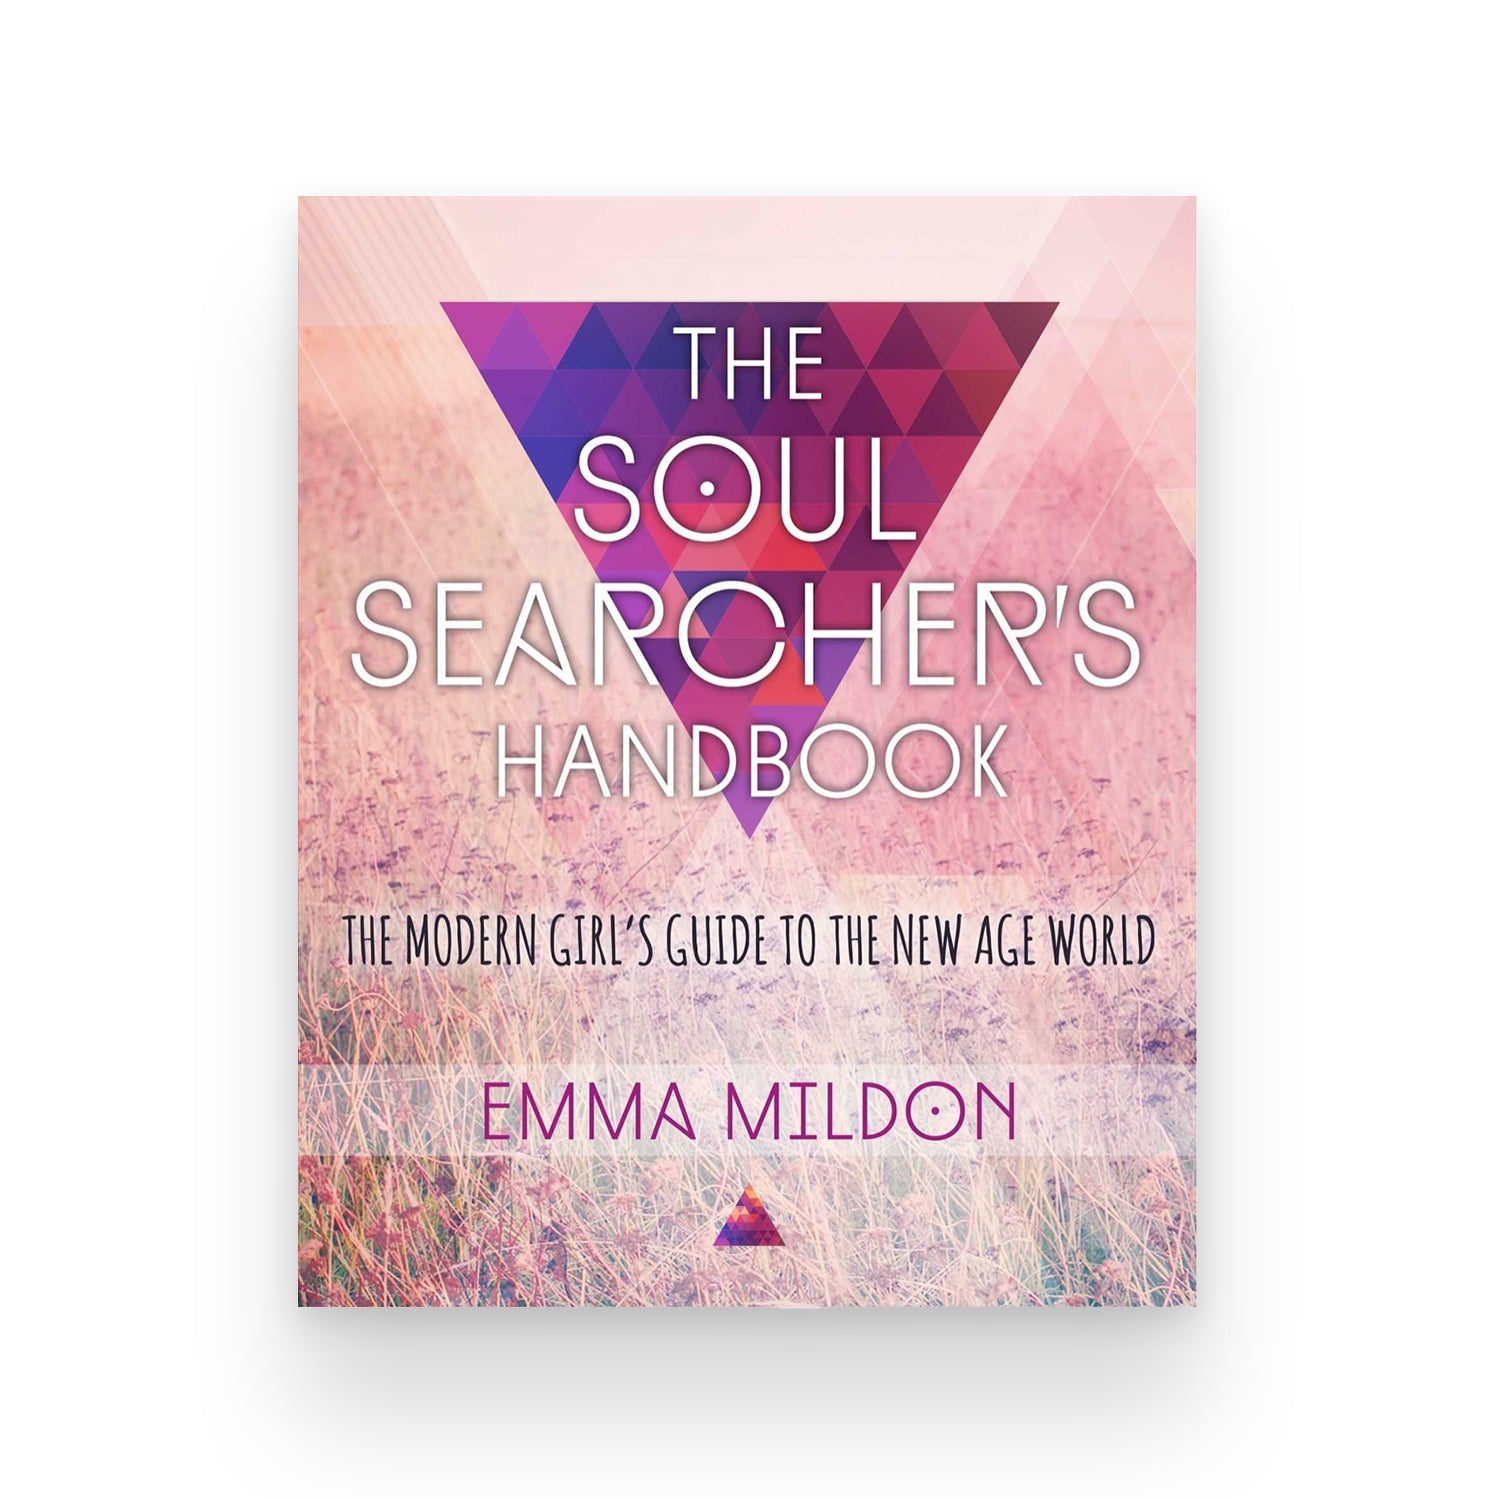 The Soul Searcher's Handbook: A Modern Girl's Guide to the New Age World - Muse + Moonstone